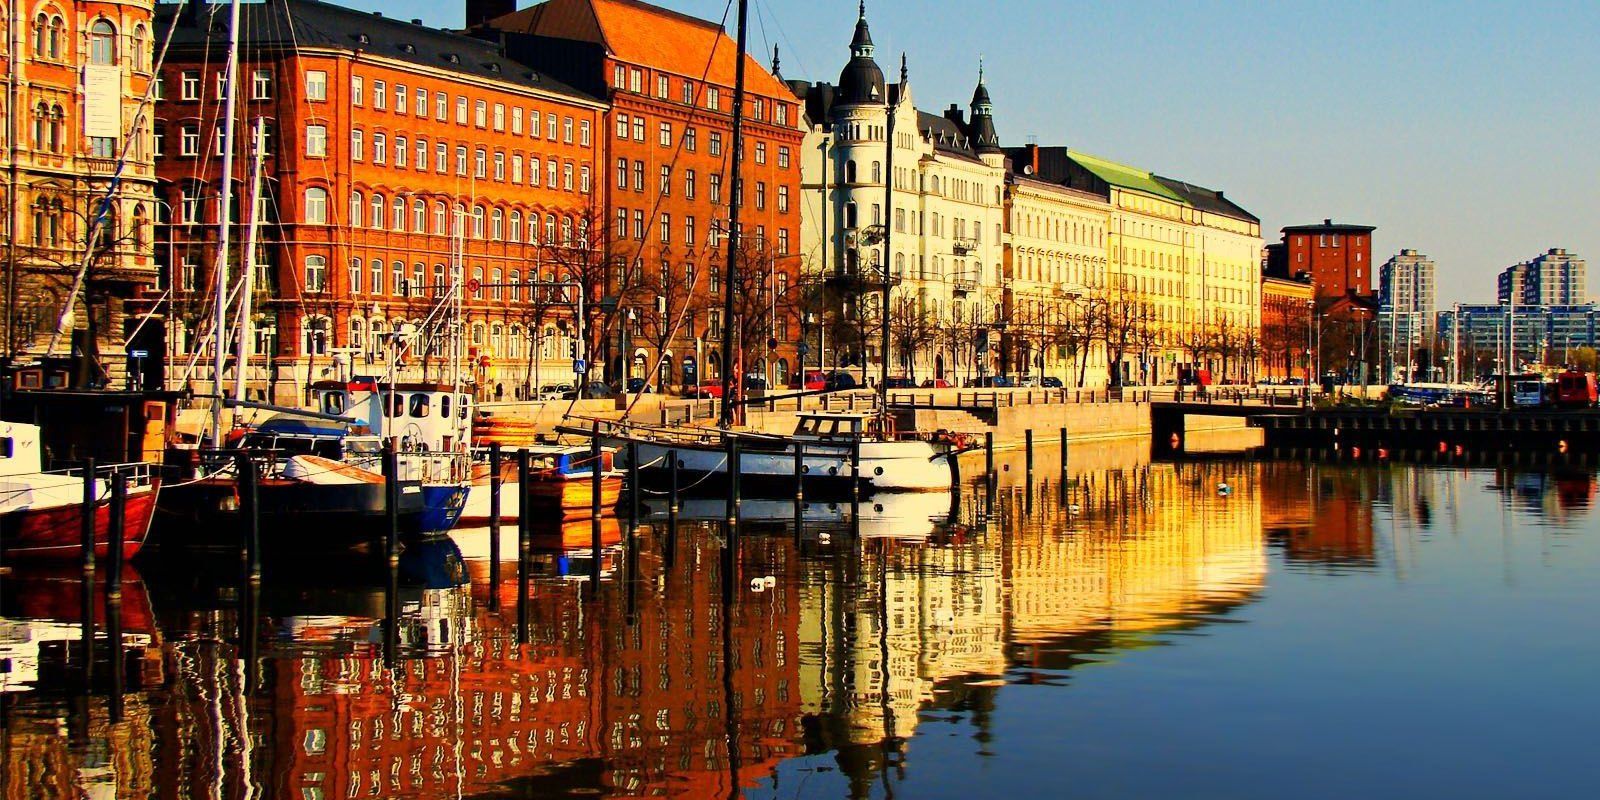 With PayPorter, you can make fast, easy and safe money transfers to Finland at the most affordable prices!